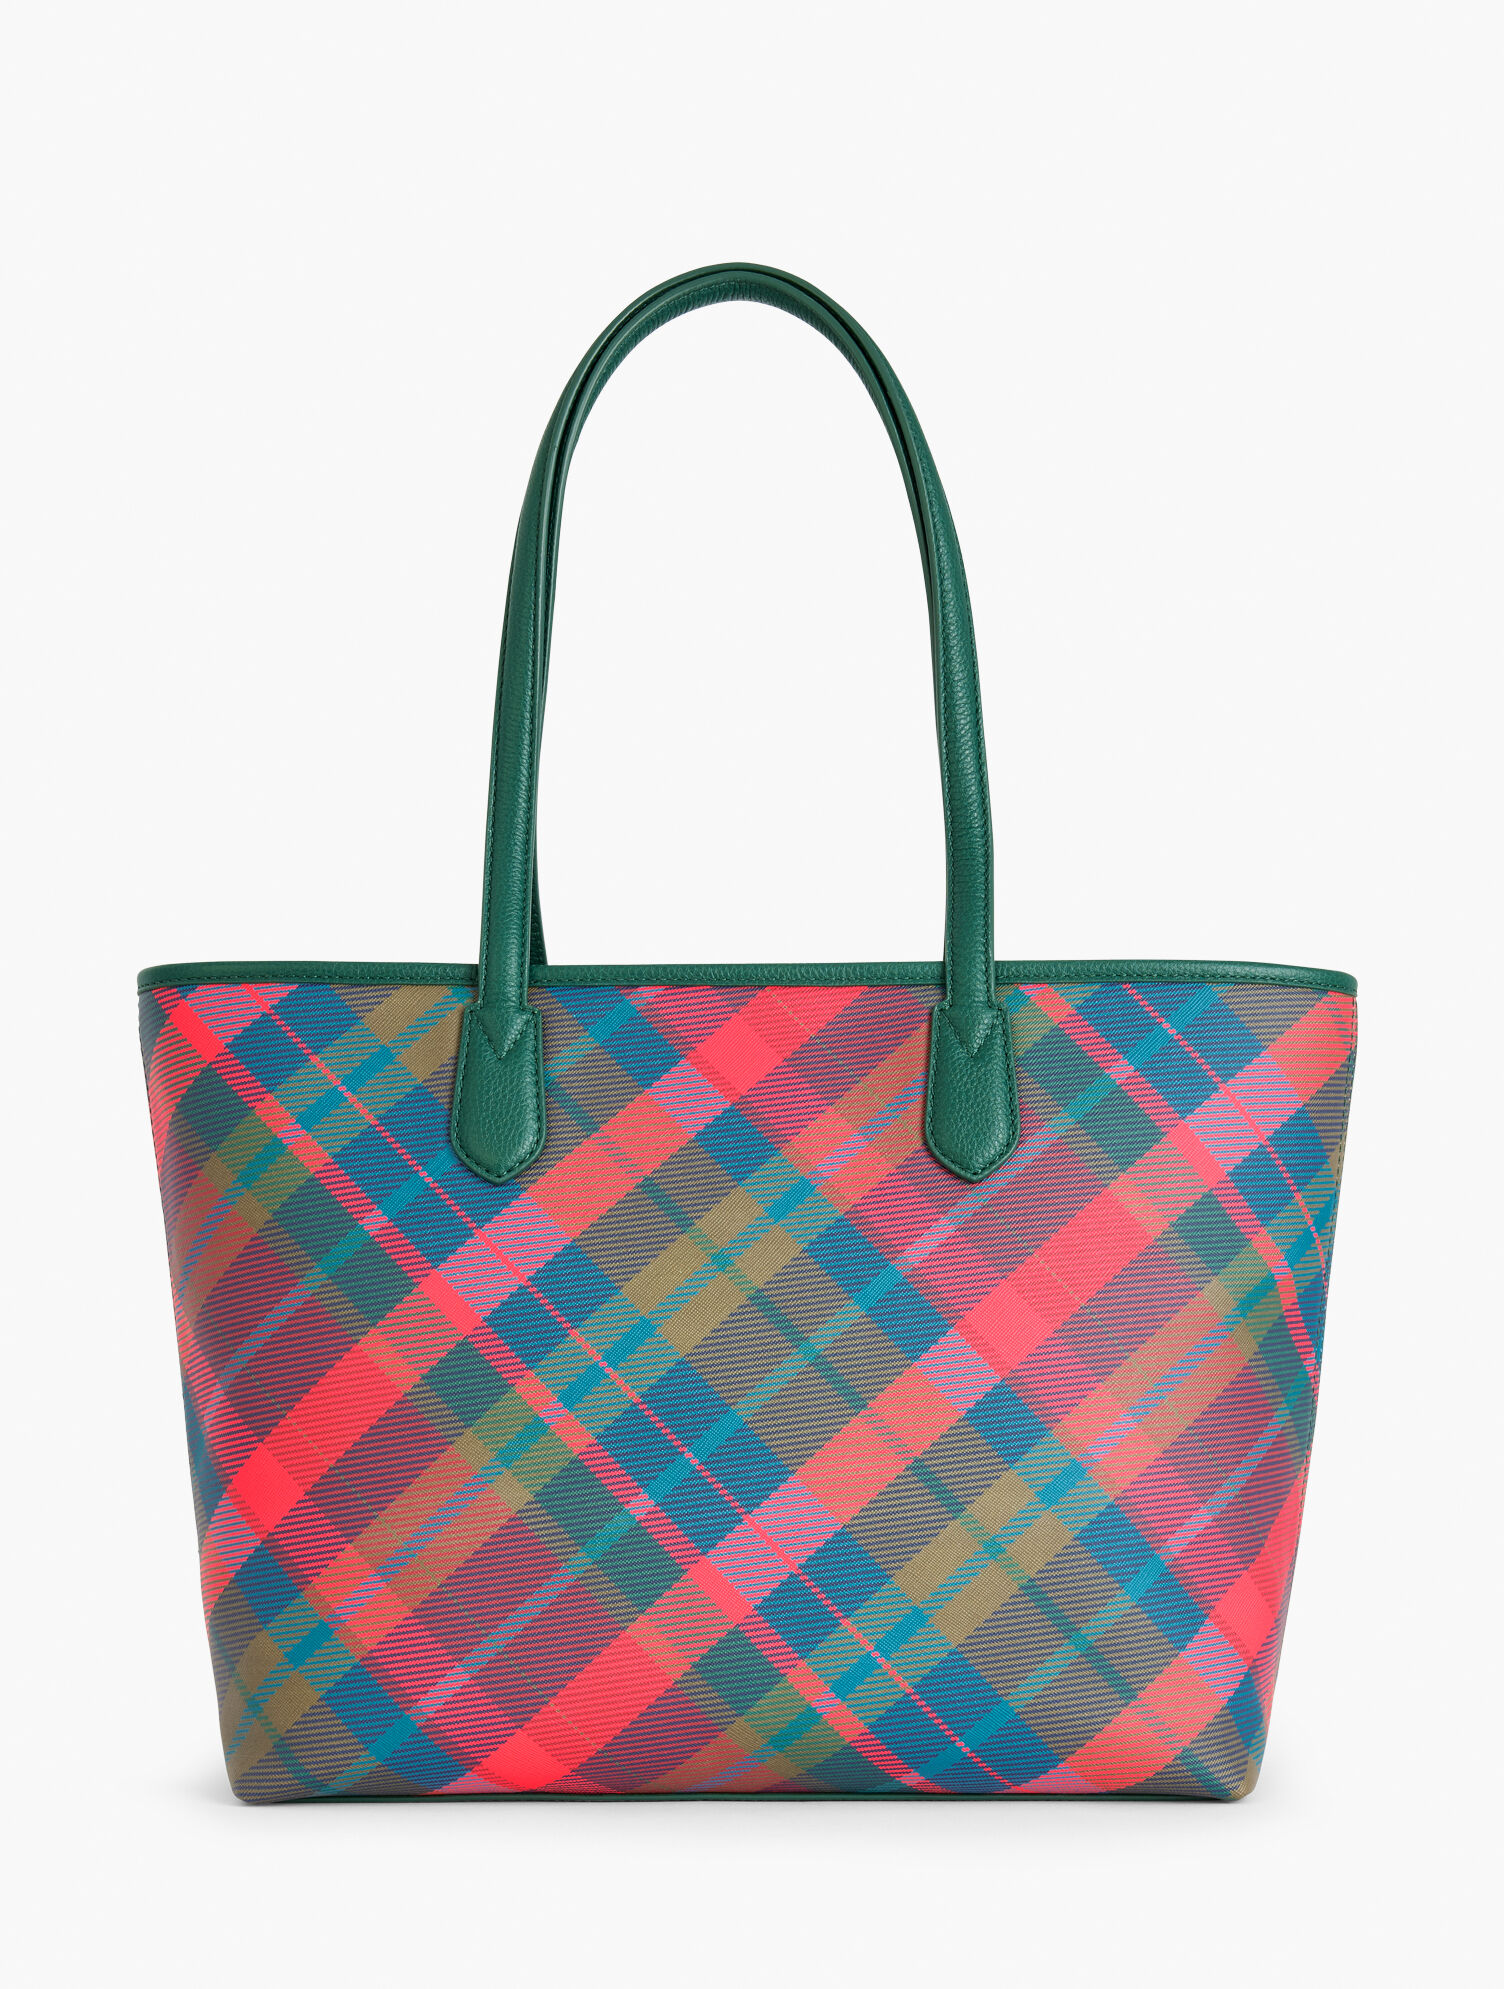 Perfect Tote - Lovely Plaid | Talbots